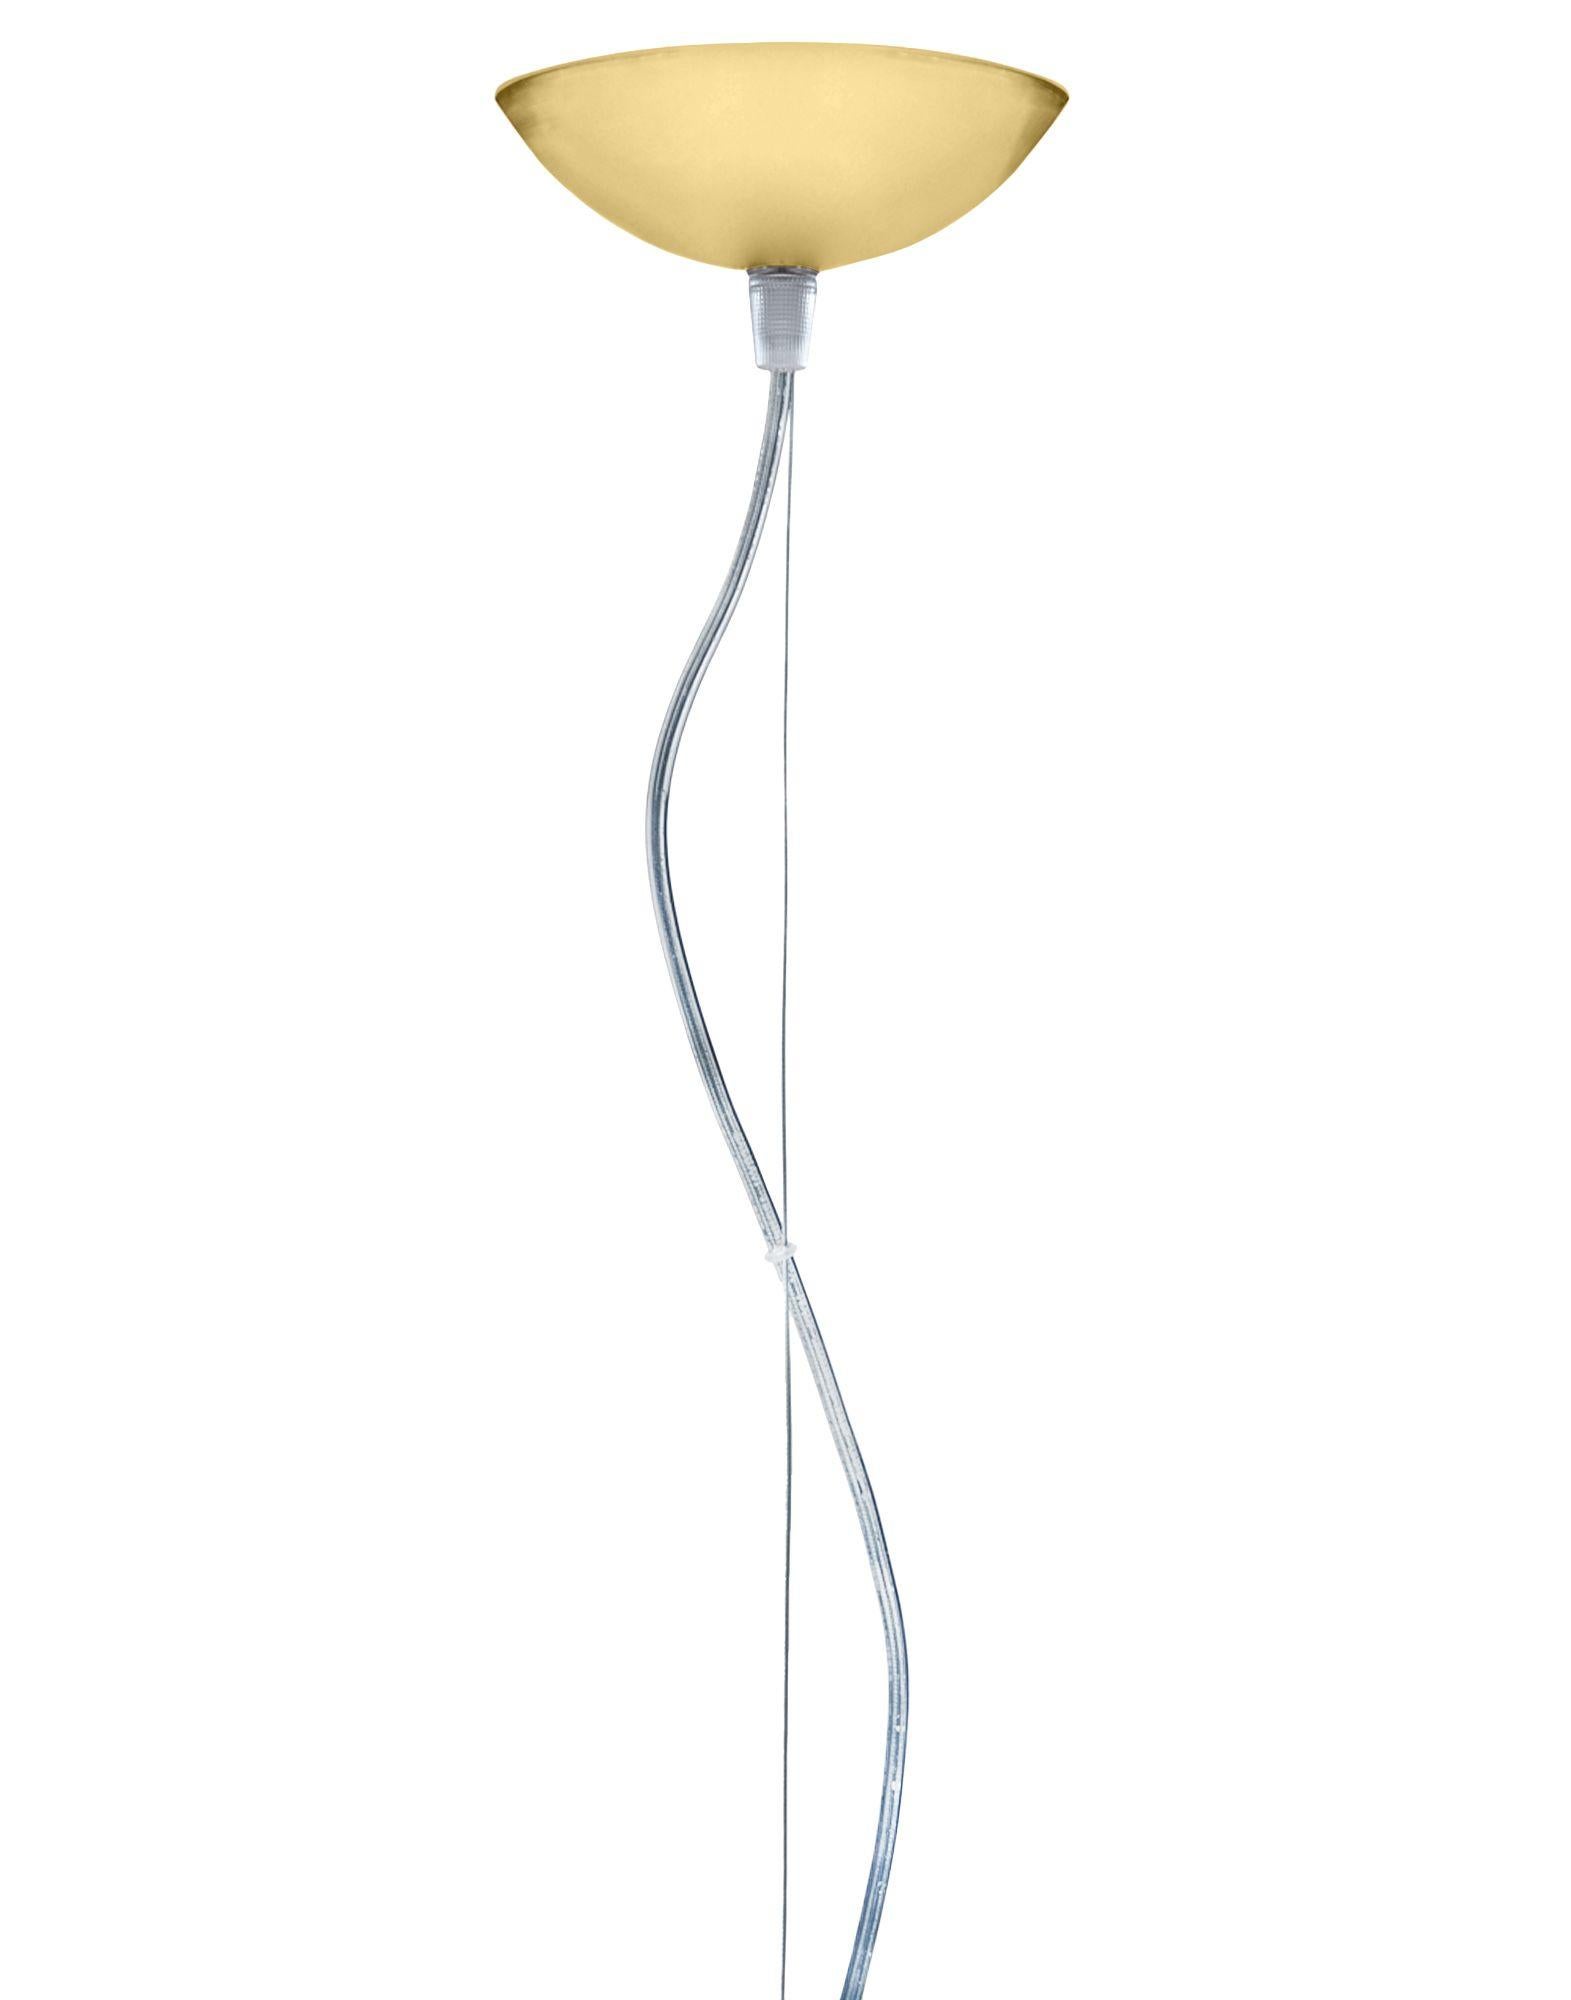 An essential lamp which is characterised by the “subtle interpretations of the theme. Made in transparent methacrylate in gold color, the cover is not perfectly hemispherical but the cut-off is underneath the height of the diameter to collect the